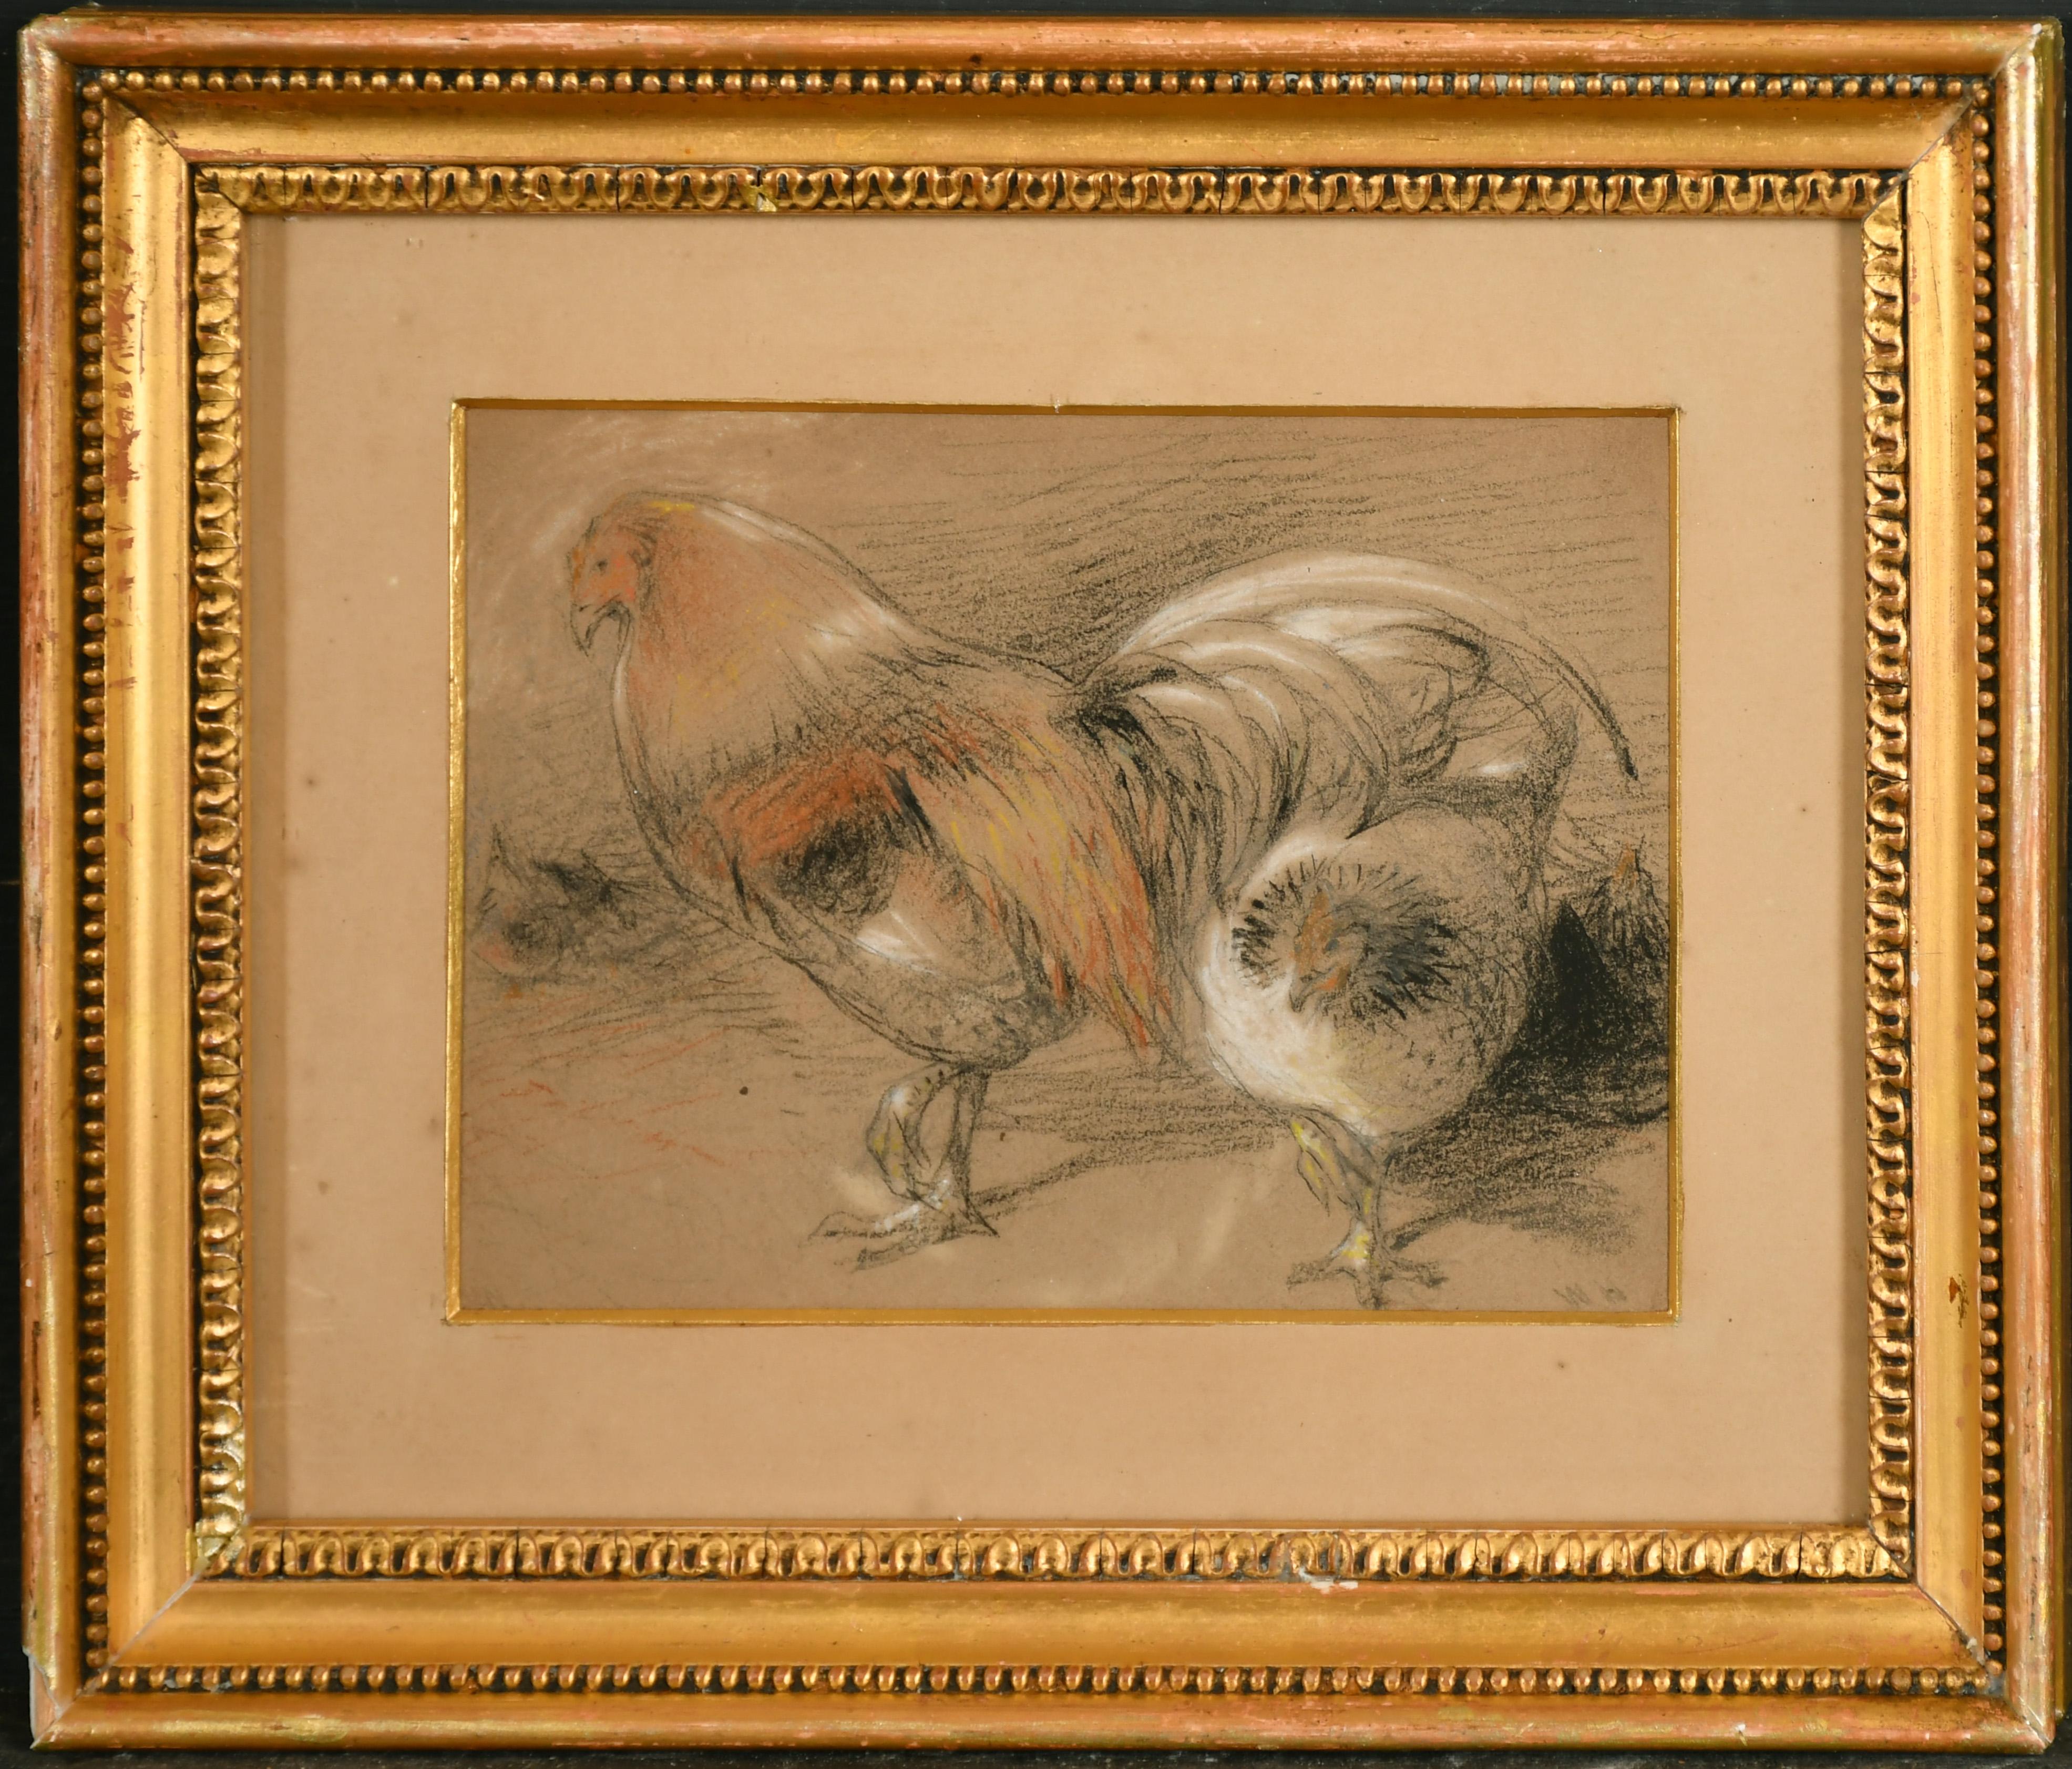 Pair of 19th century English chalk drawing on paper of Cockerel  - Art by William Huggins